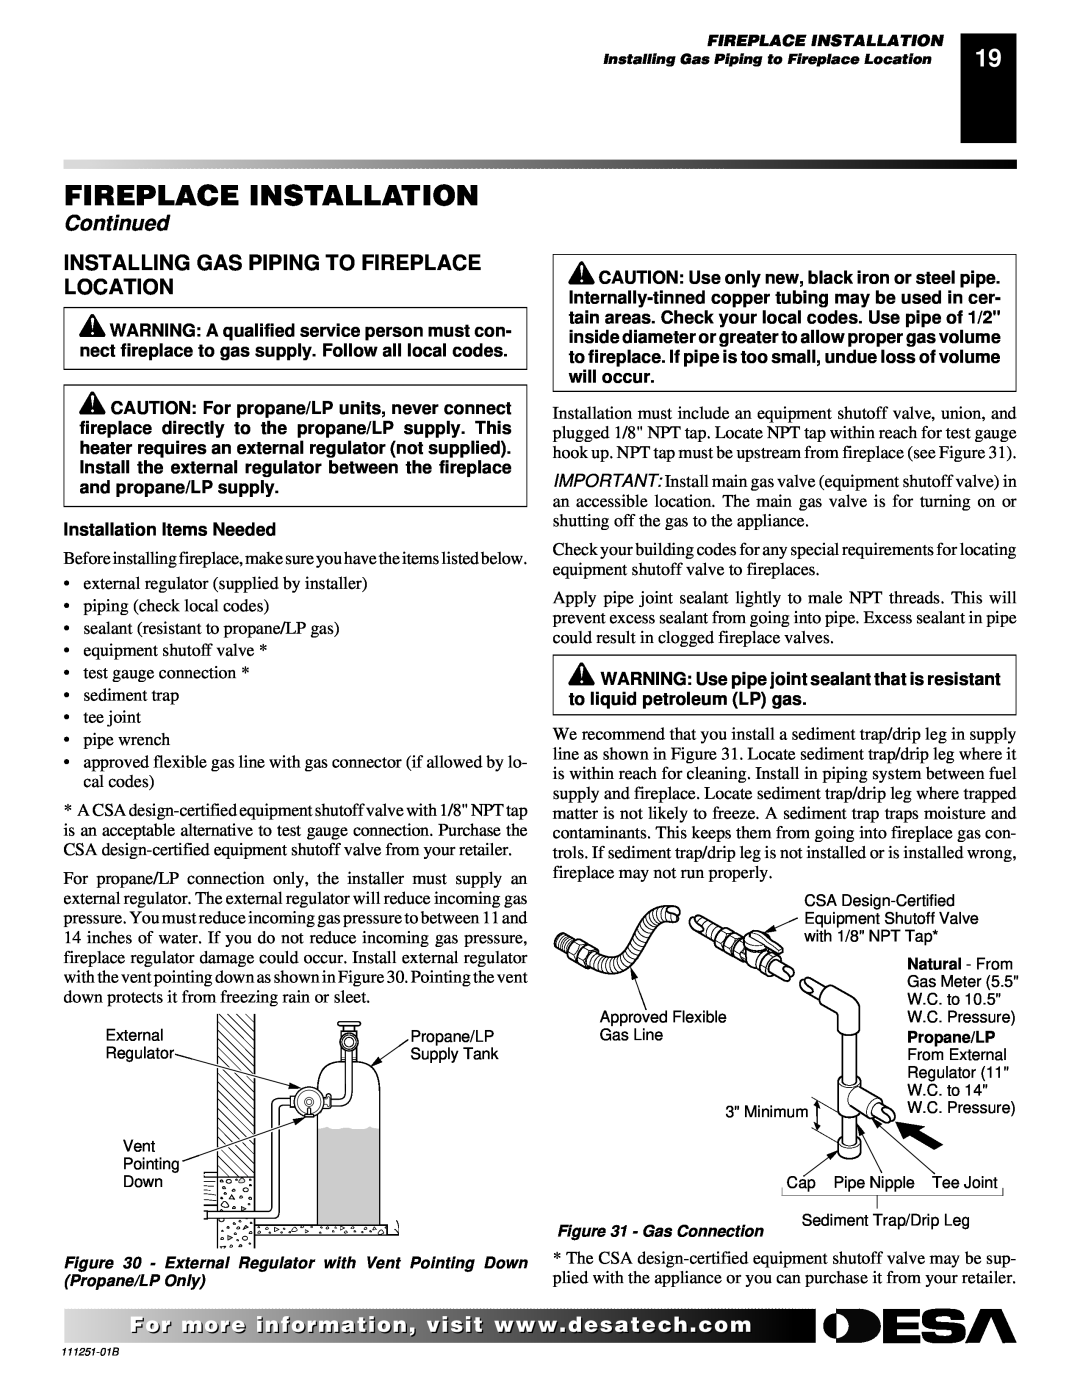 Desa (V)T36ENA installation manual Fireplace Installation, Continued, Installing Gas Piping To Fireplace Location 